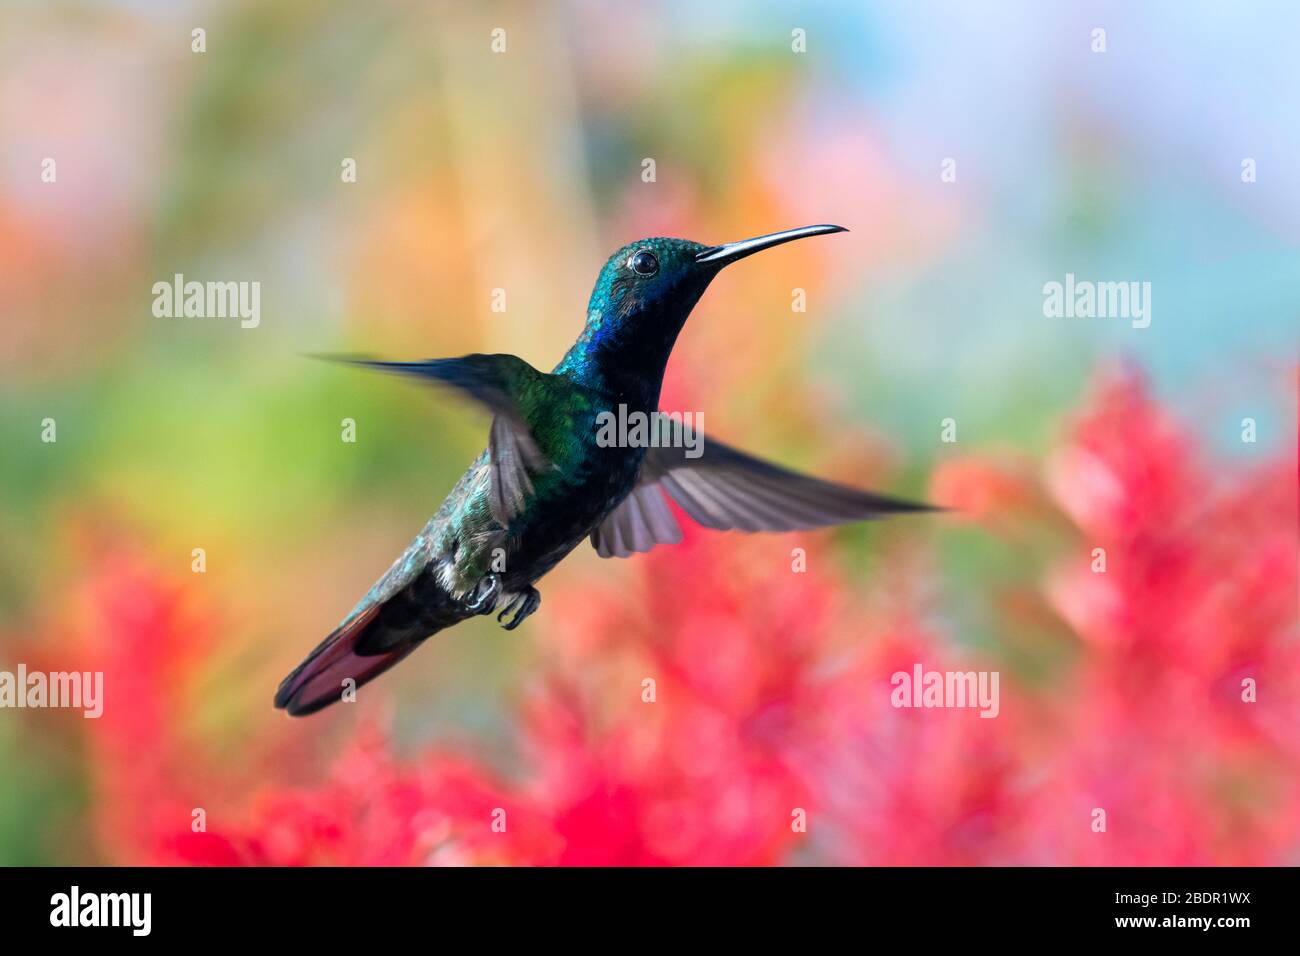 A Black-throated Mango hummingbird hovering in a tropical garden with flowers and foliage blurred in the background. Stock Photo